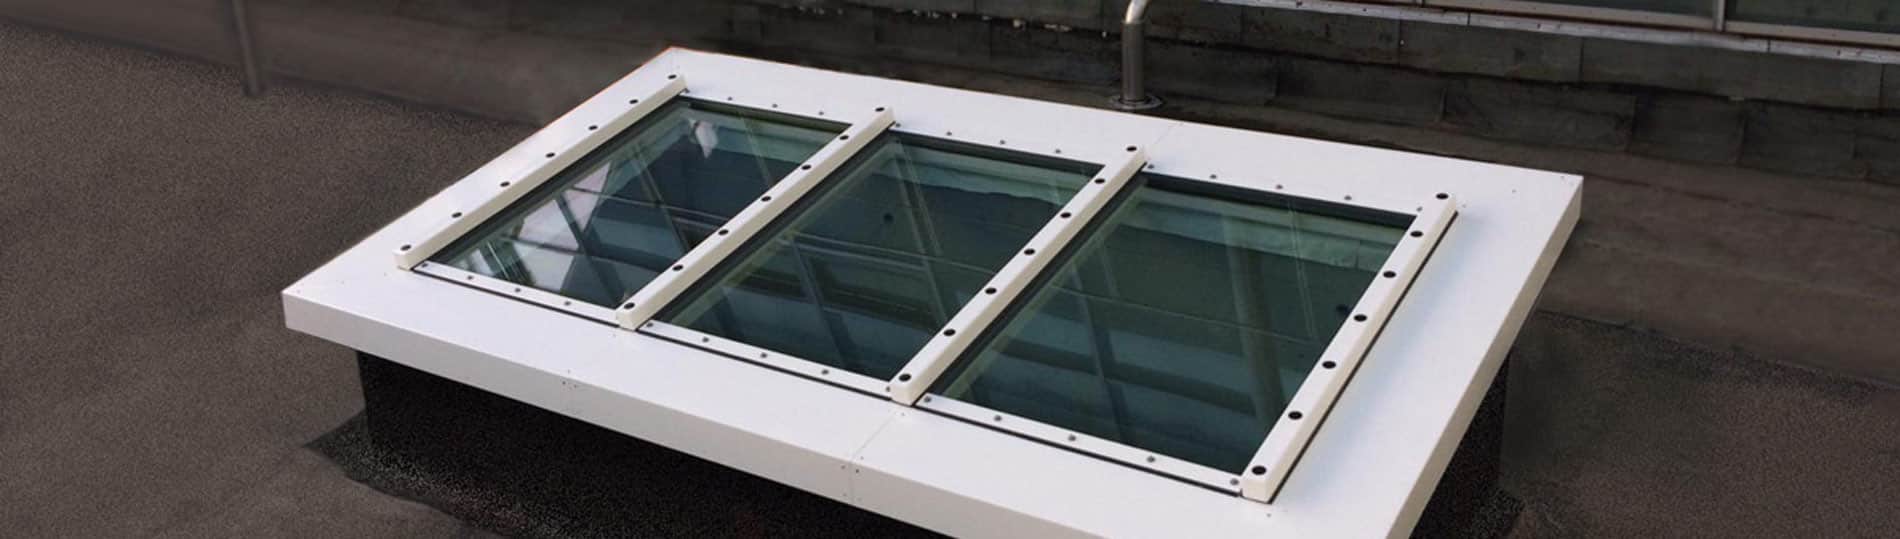 Fire safety monopitch rooflight 